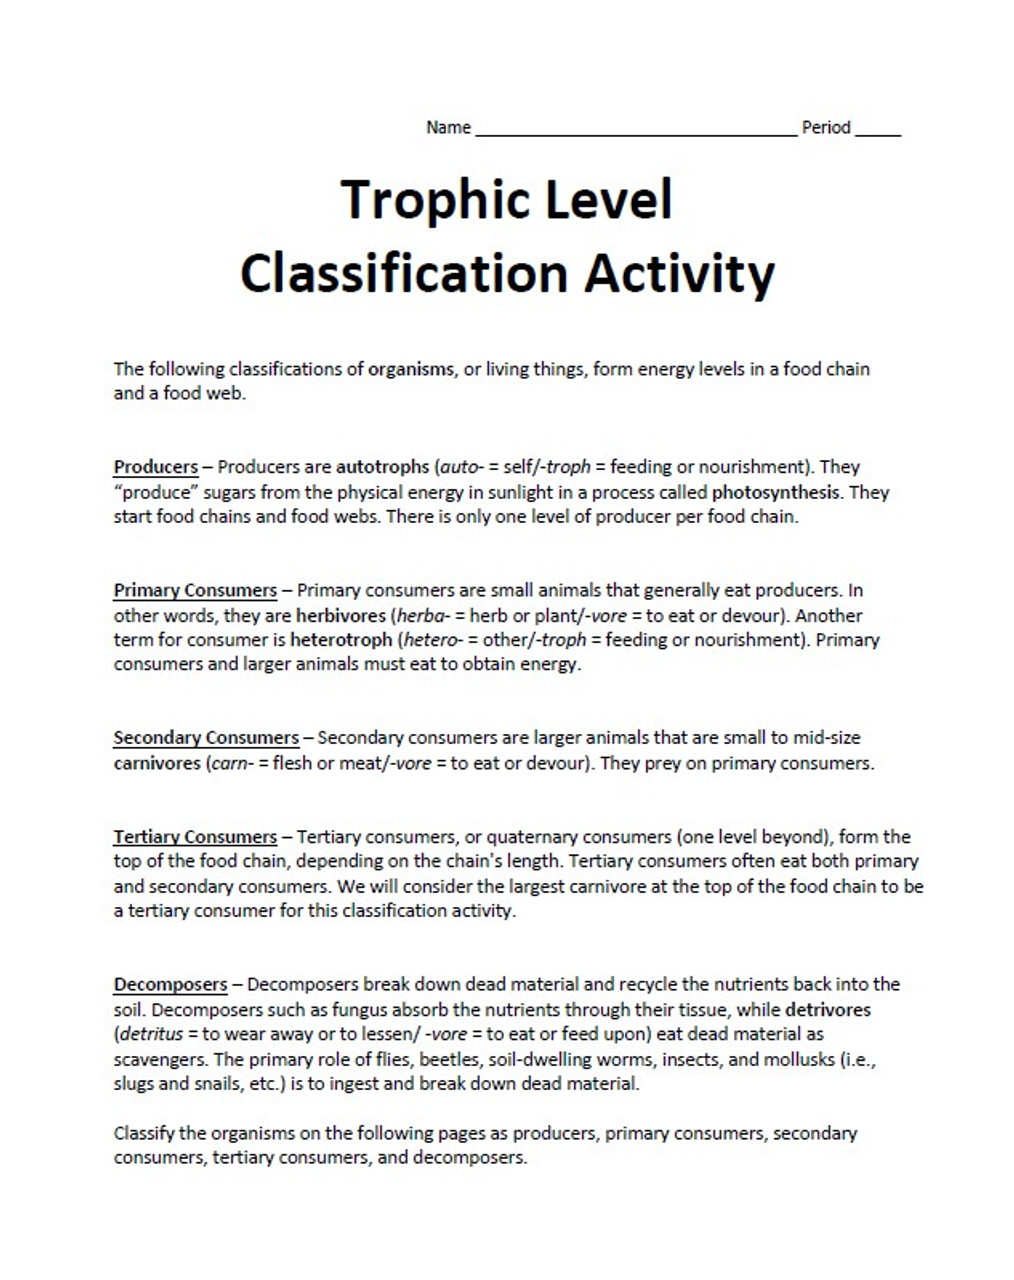 Trophic Level Classification Activity (Producers, Consumers, and Decomposers)